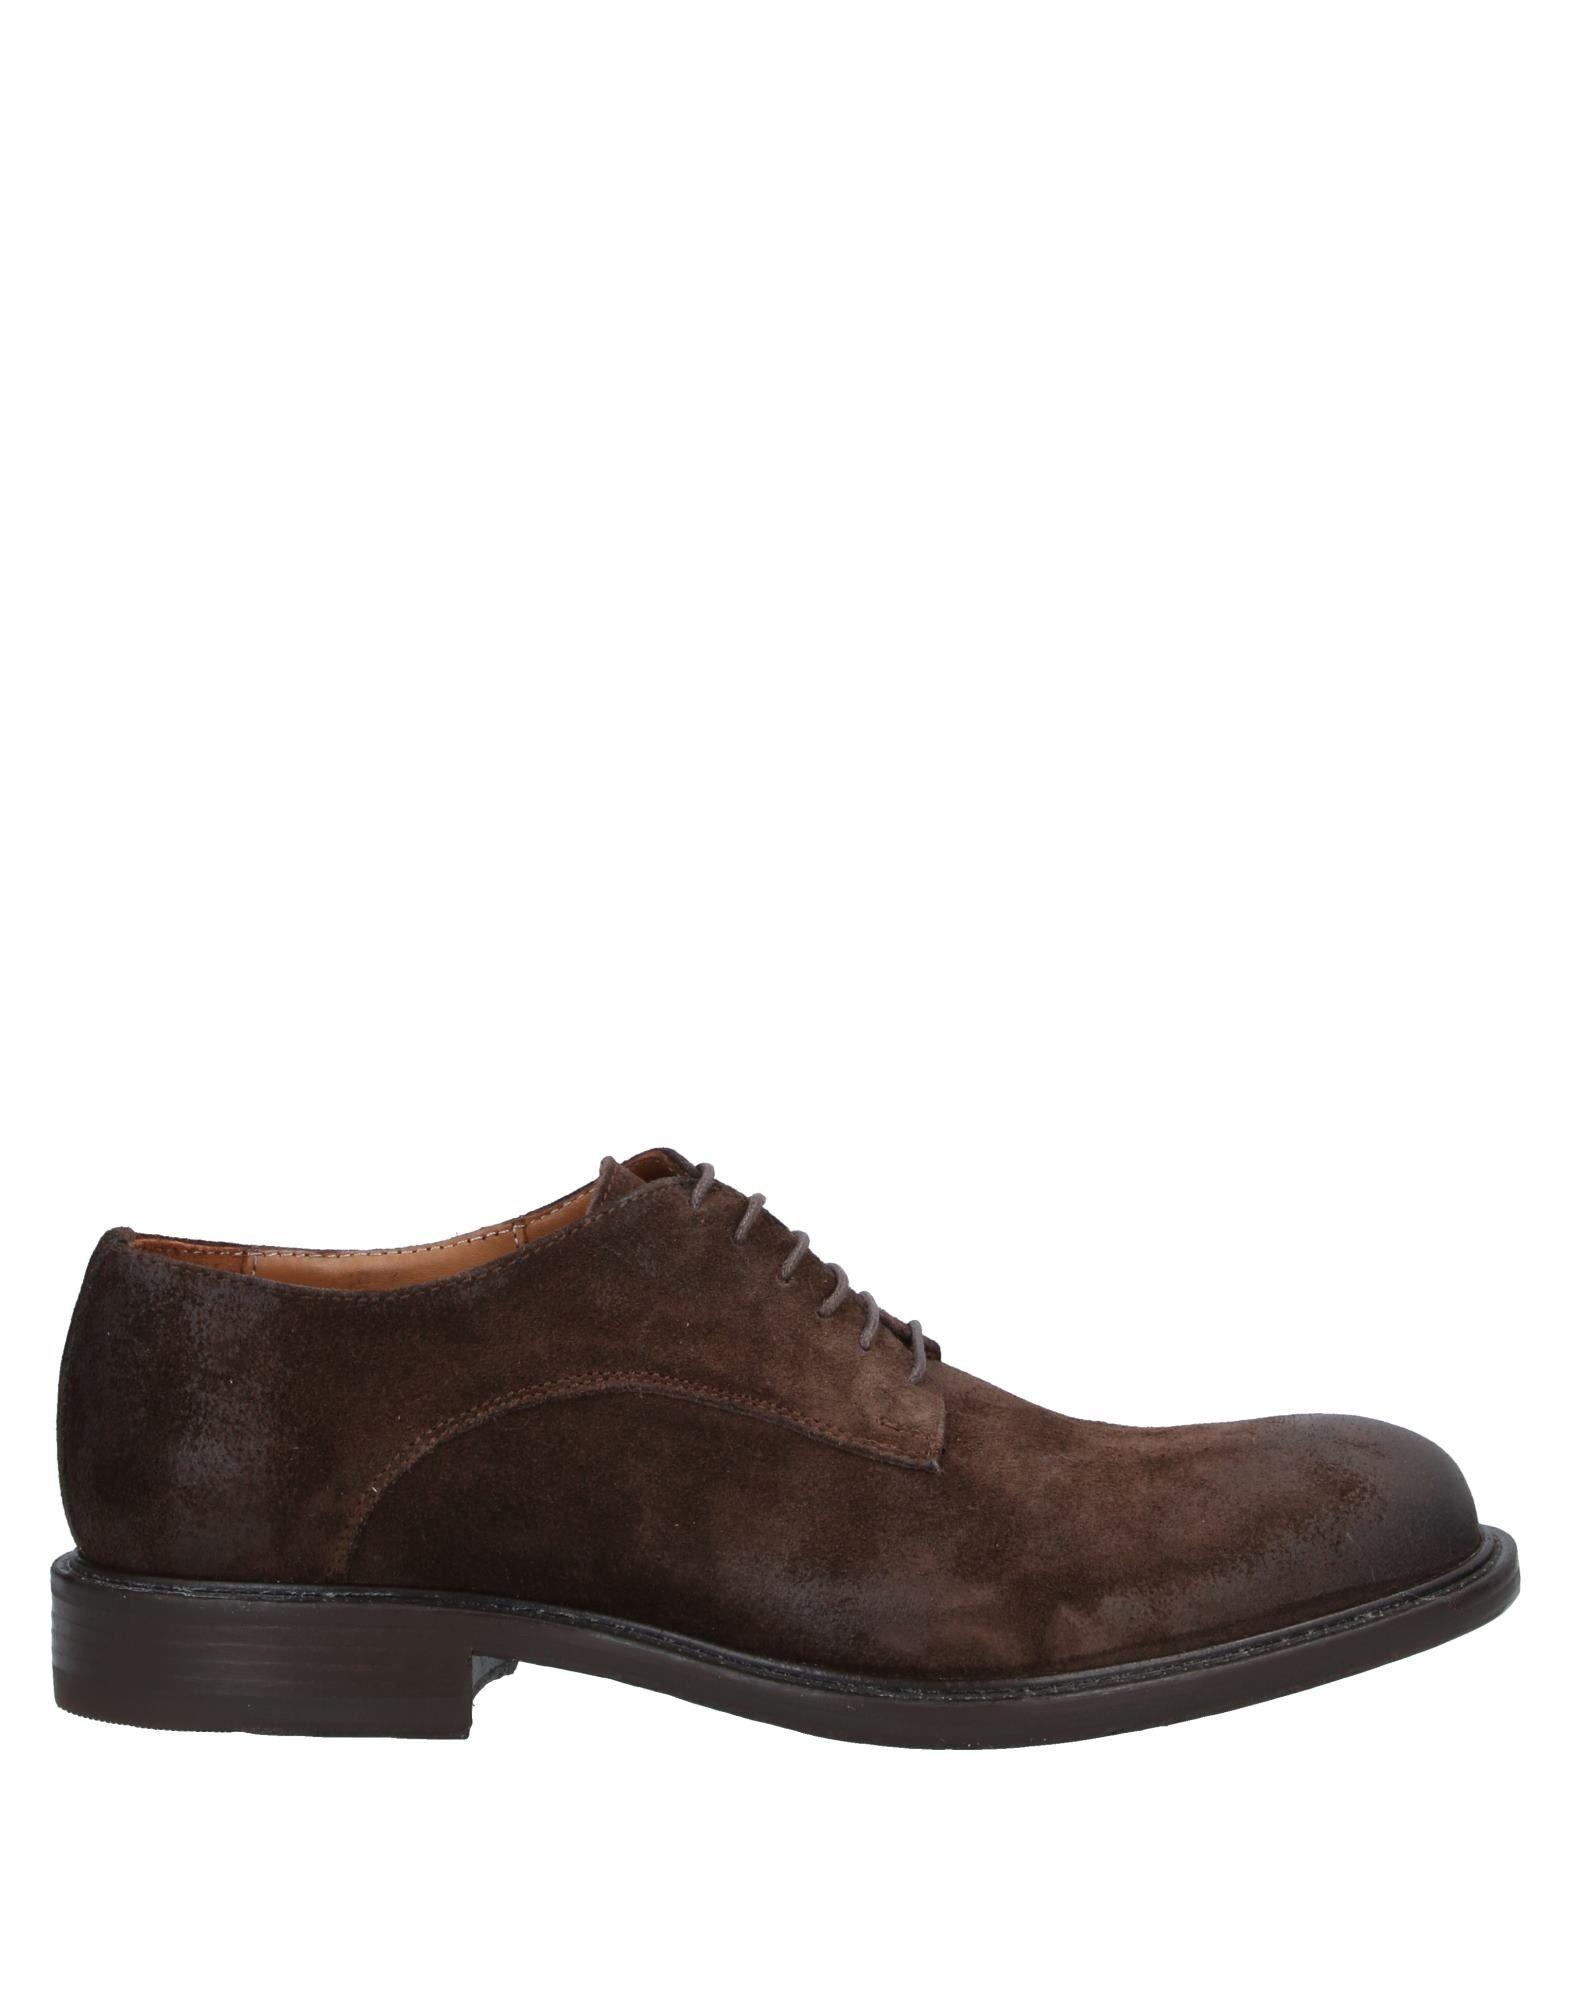 TON GOÛT Leather Lace-up Shoe in Dark Brown (Brown) for Men - Lyst